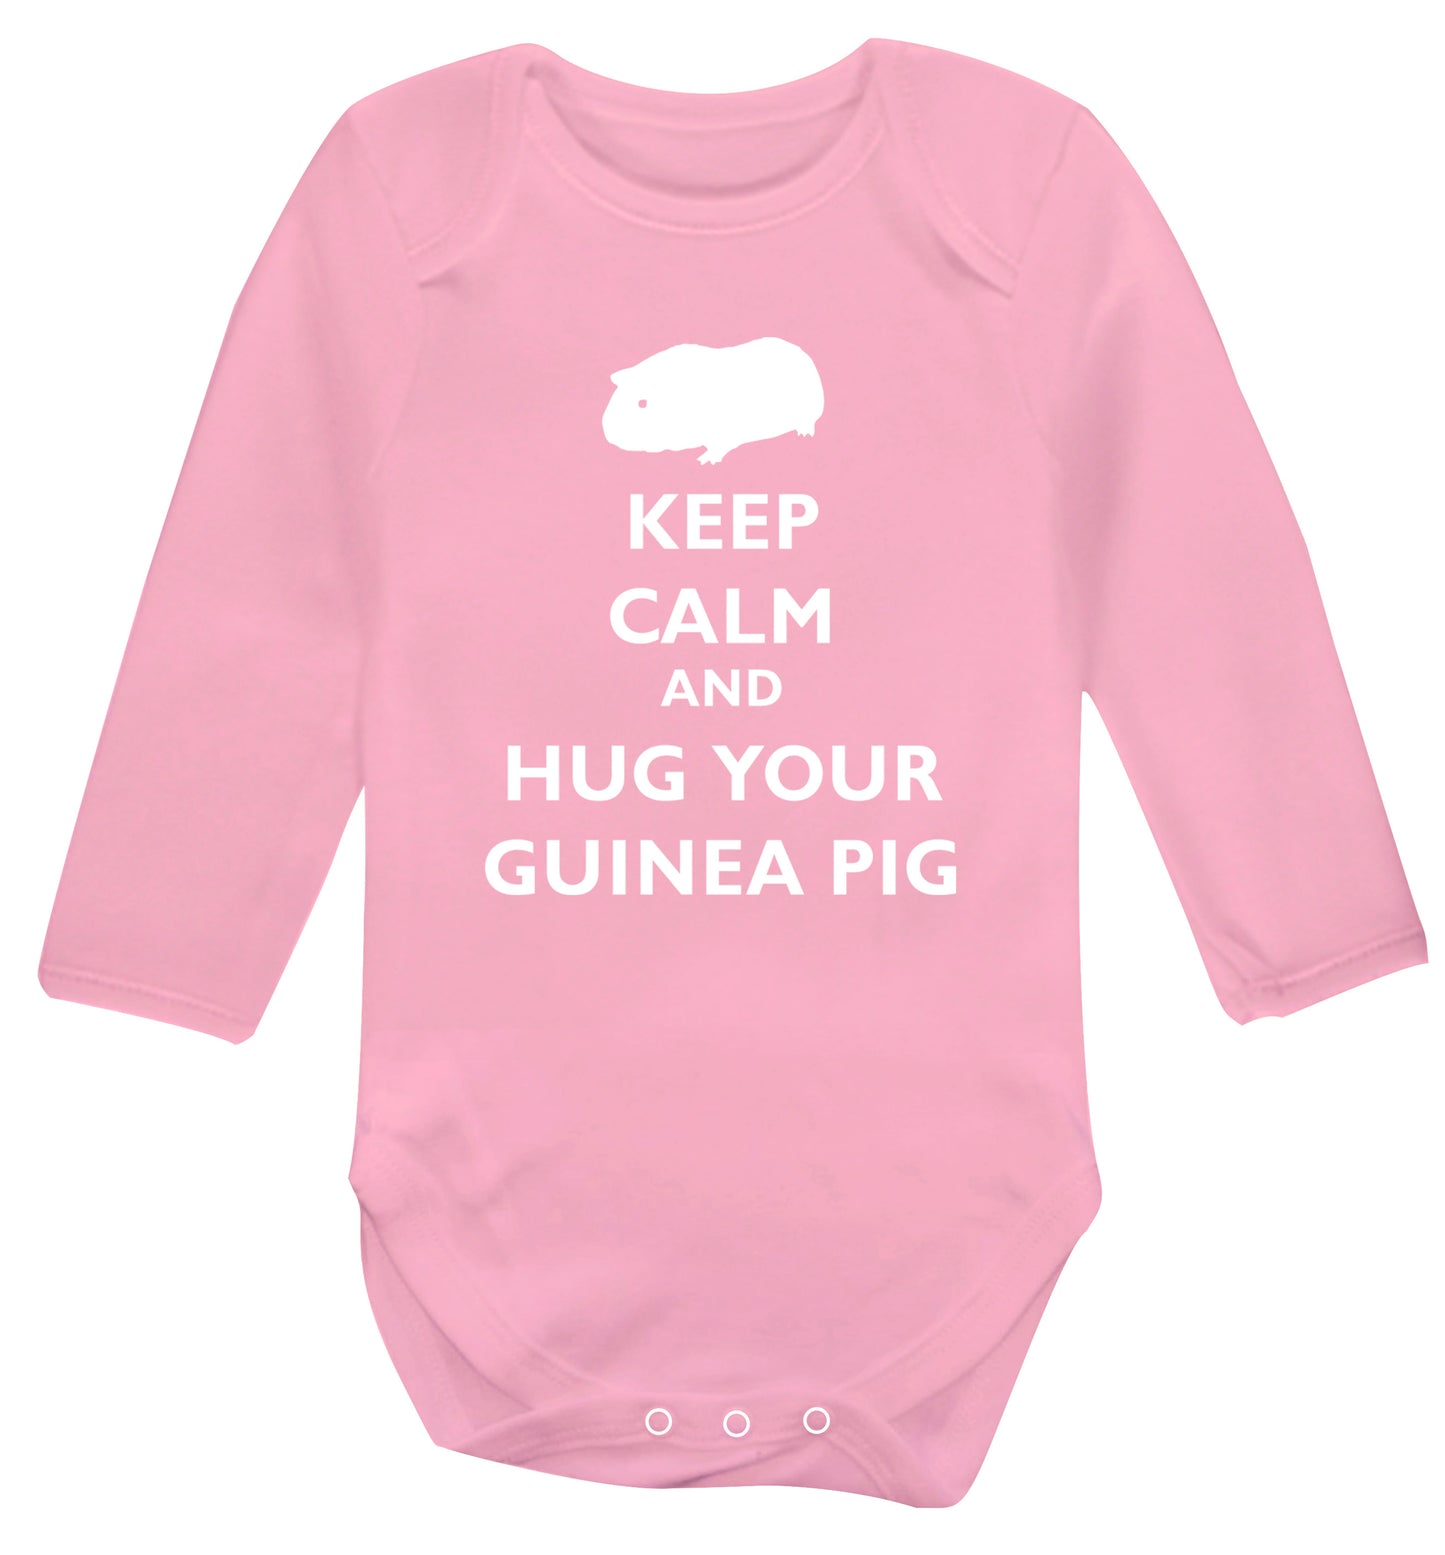 Keep calm and hug your guineapig Baby Vest long sleeved pale pink 6-12 months